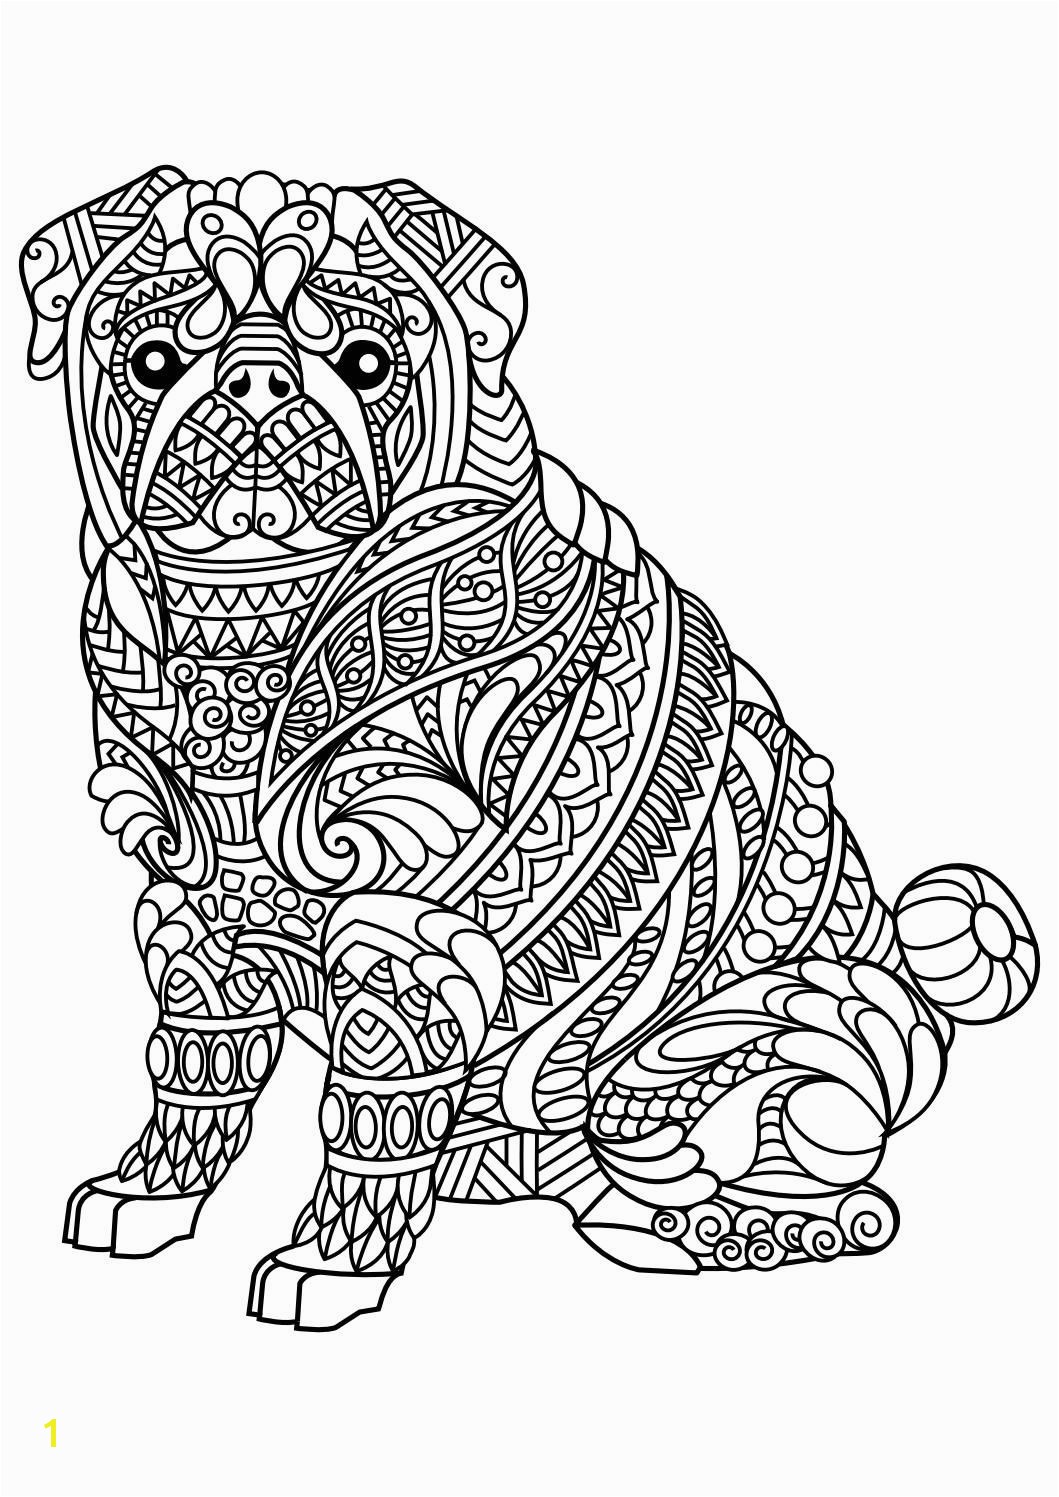 Realistic Animal Coloring Pages Animal Coloring Pages Pdf Coloring Animals Pinterest